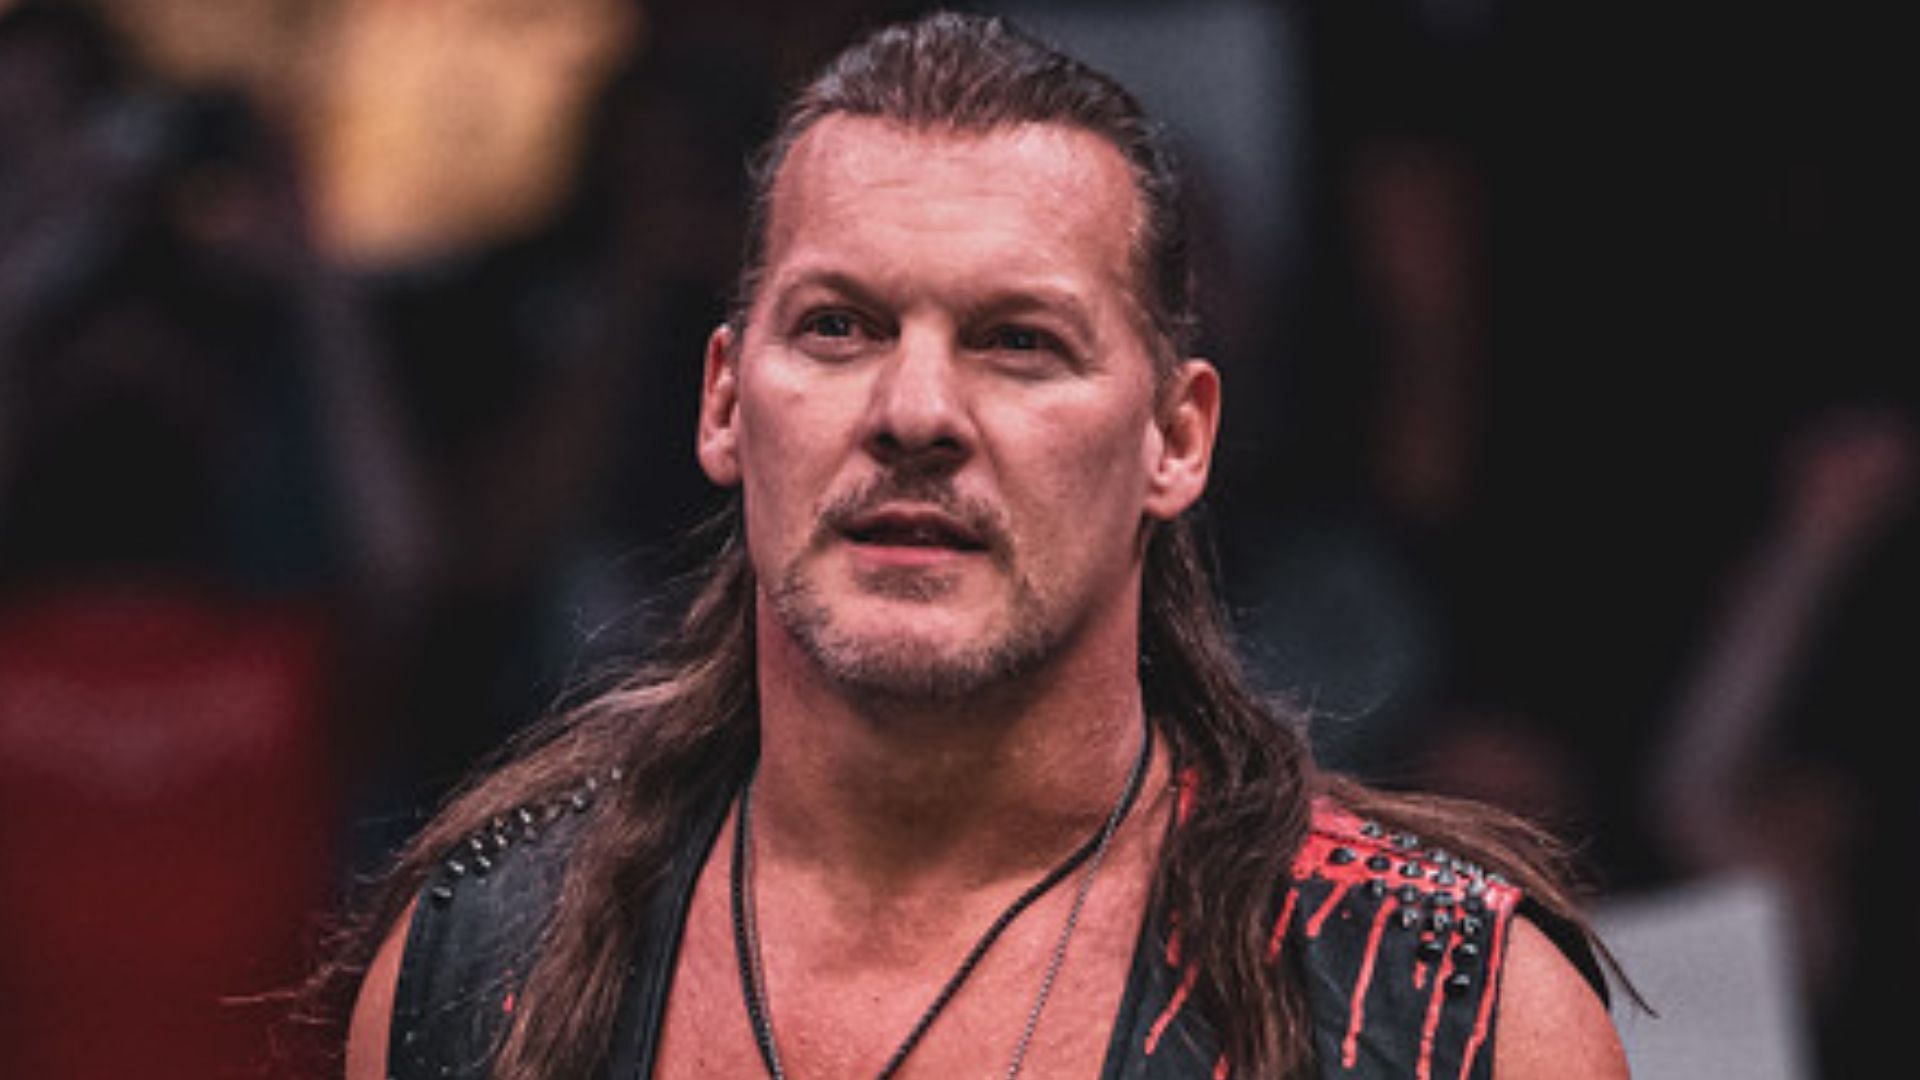 Chris Jericho at an AEW event in 2022!